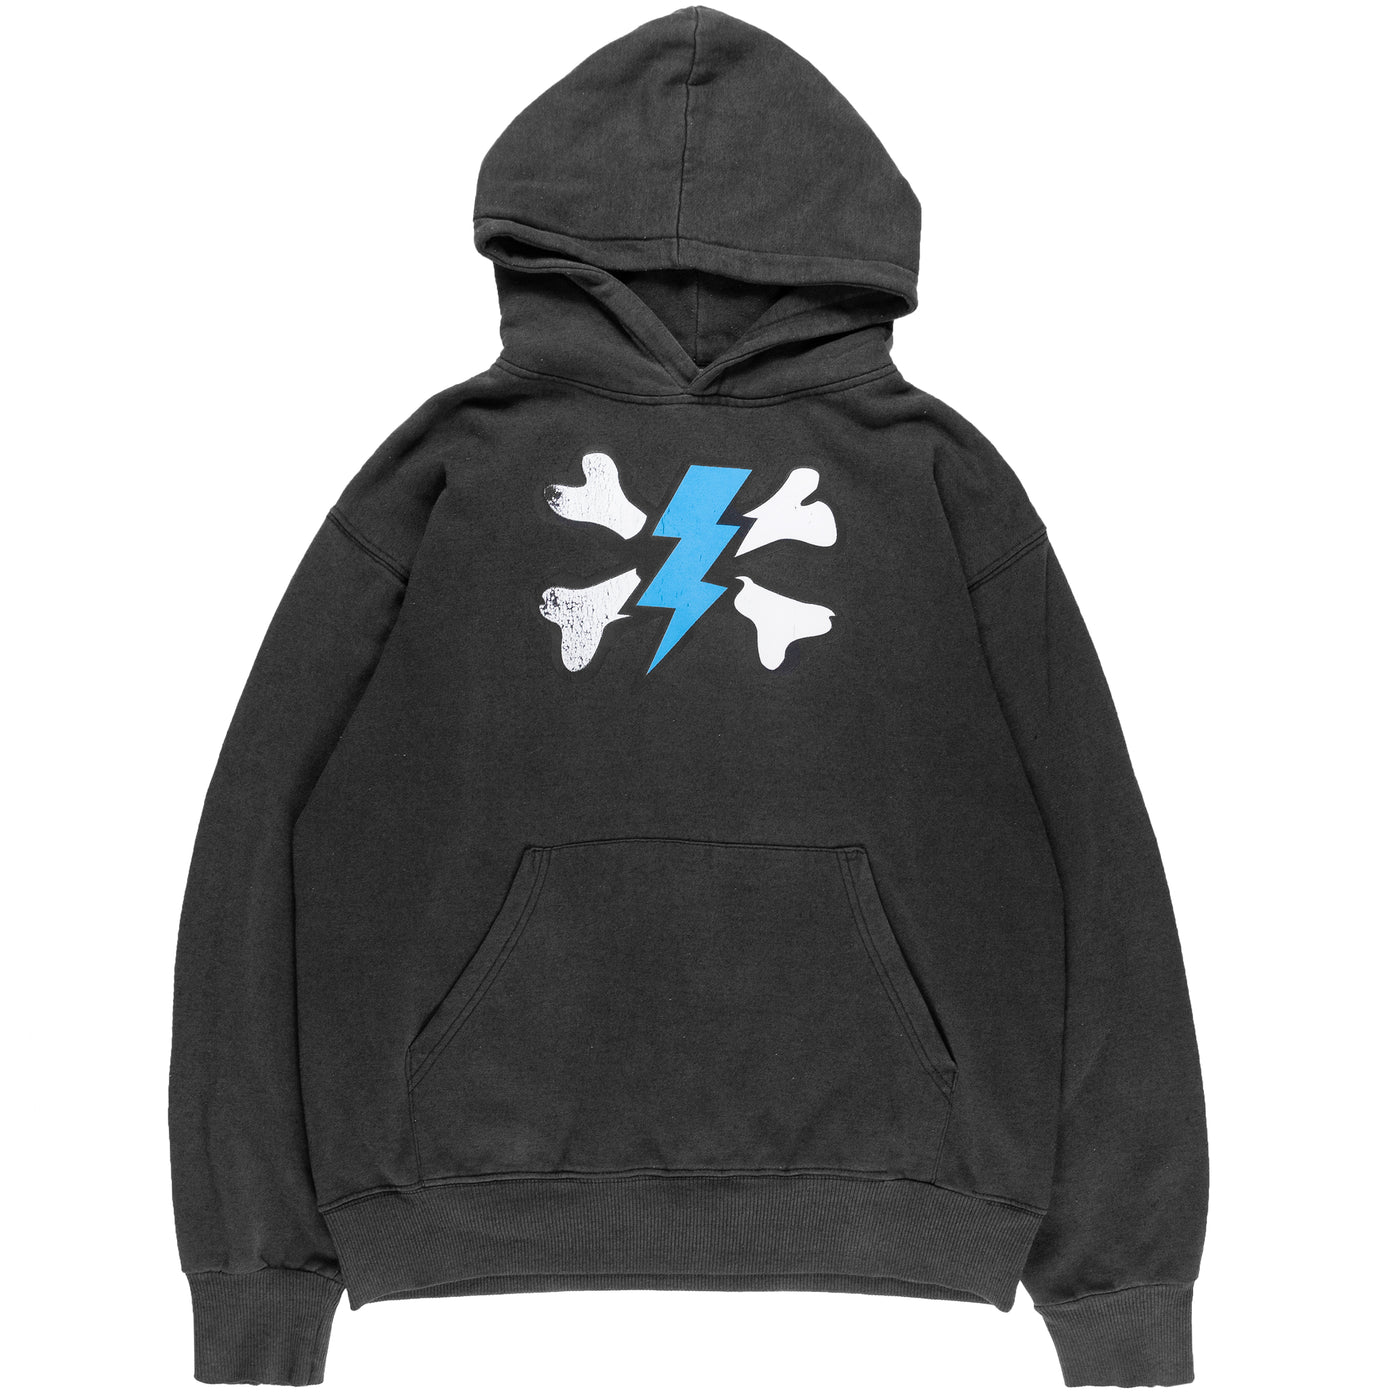 Undercover “Chaotic Mutant” Hoodie - SS01 “Chaotic Discord” – SILVER LEAGUE